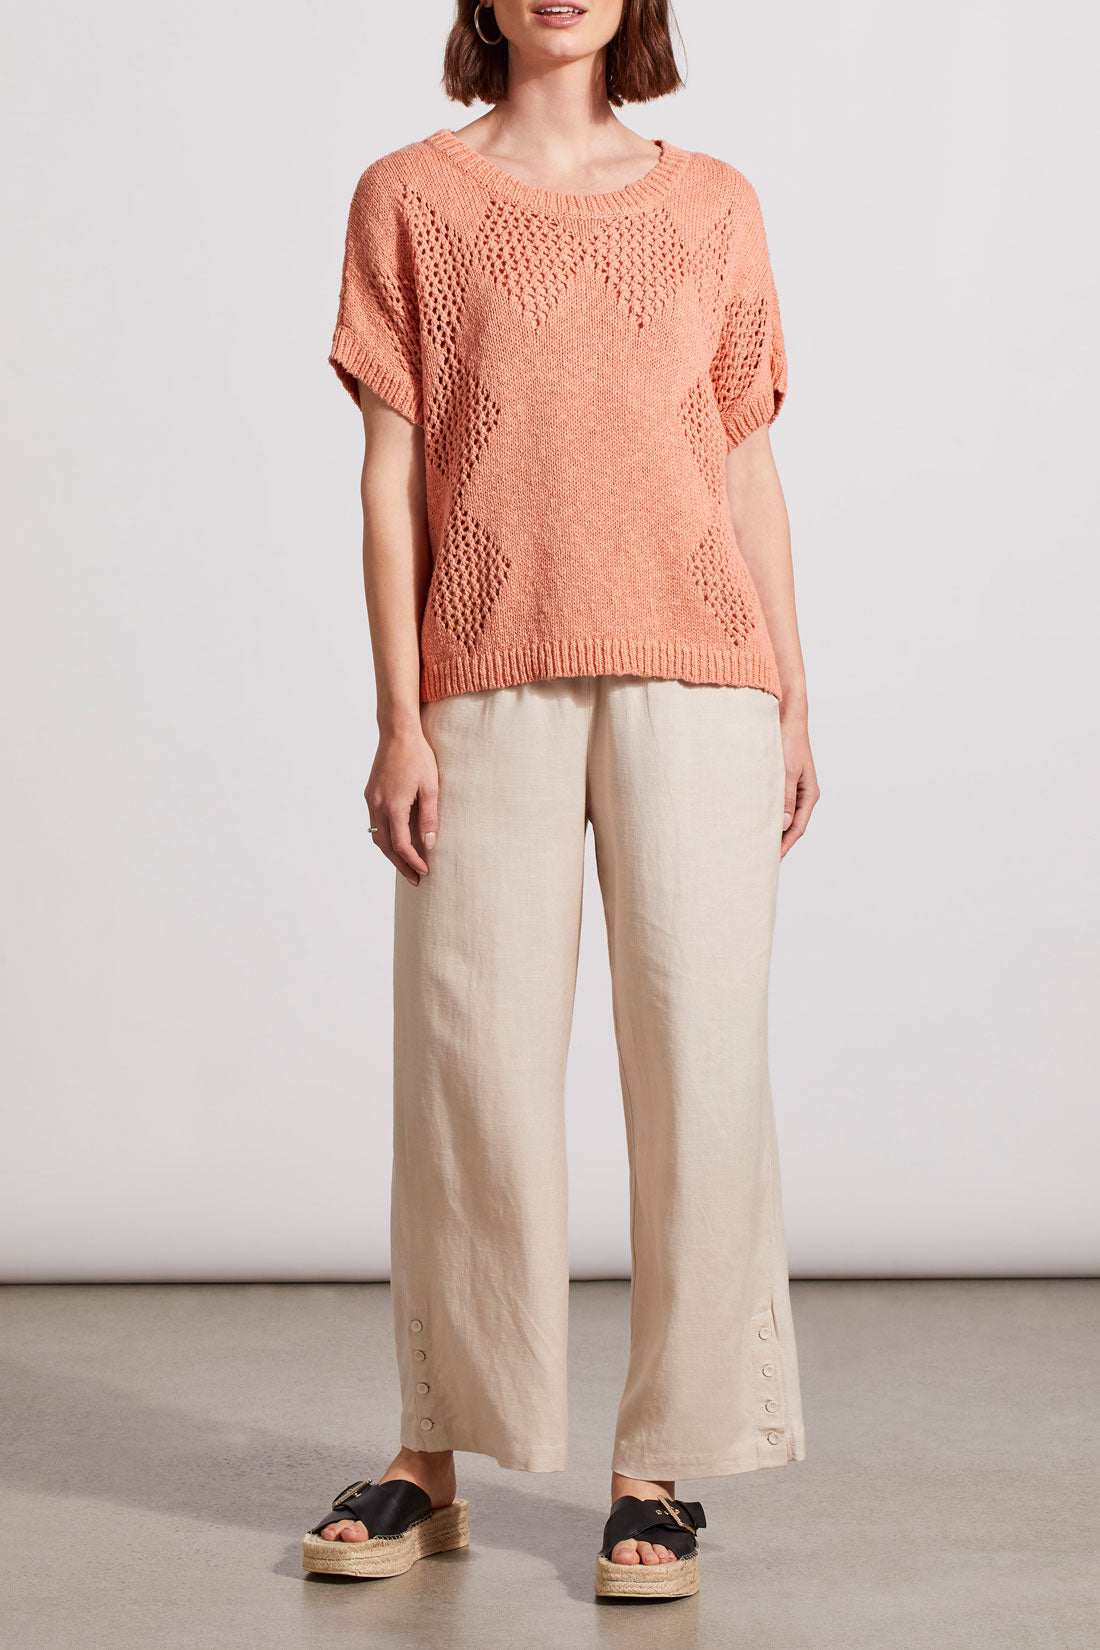 Woman wearing a stylish coral Dolman Short Sleeve Crochet Sweater by Tribal with a layering patterned design.